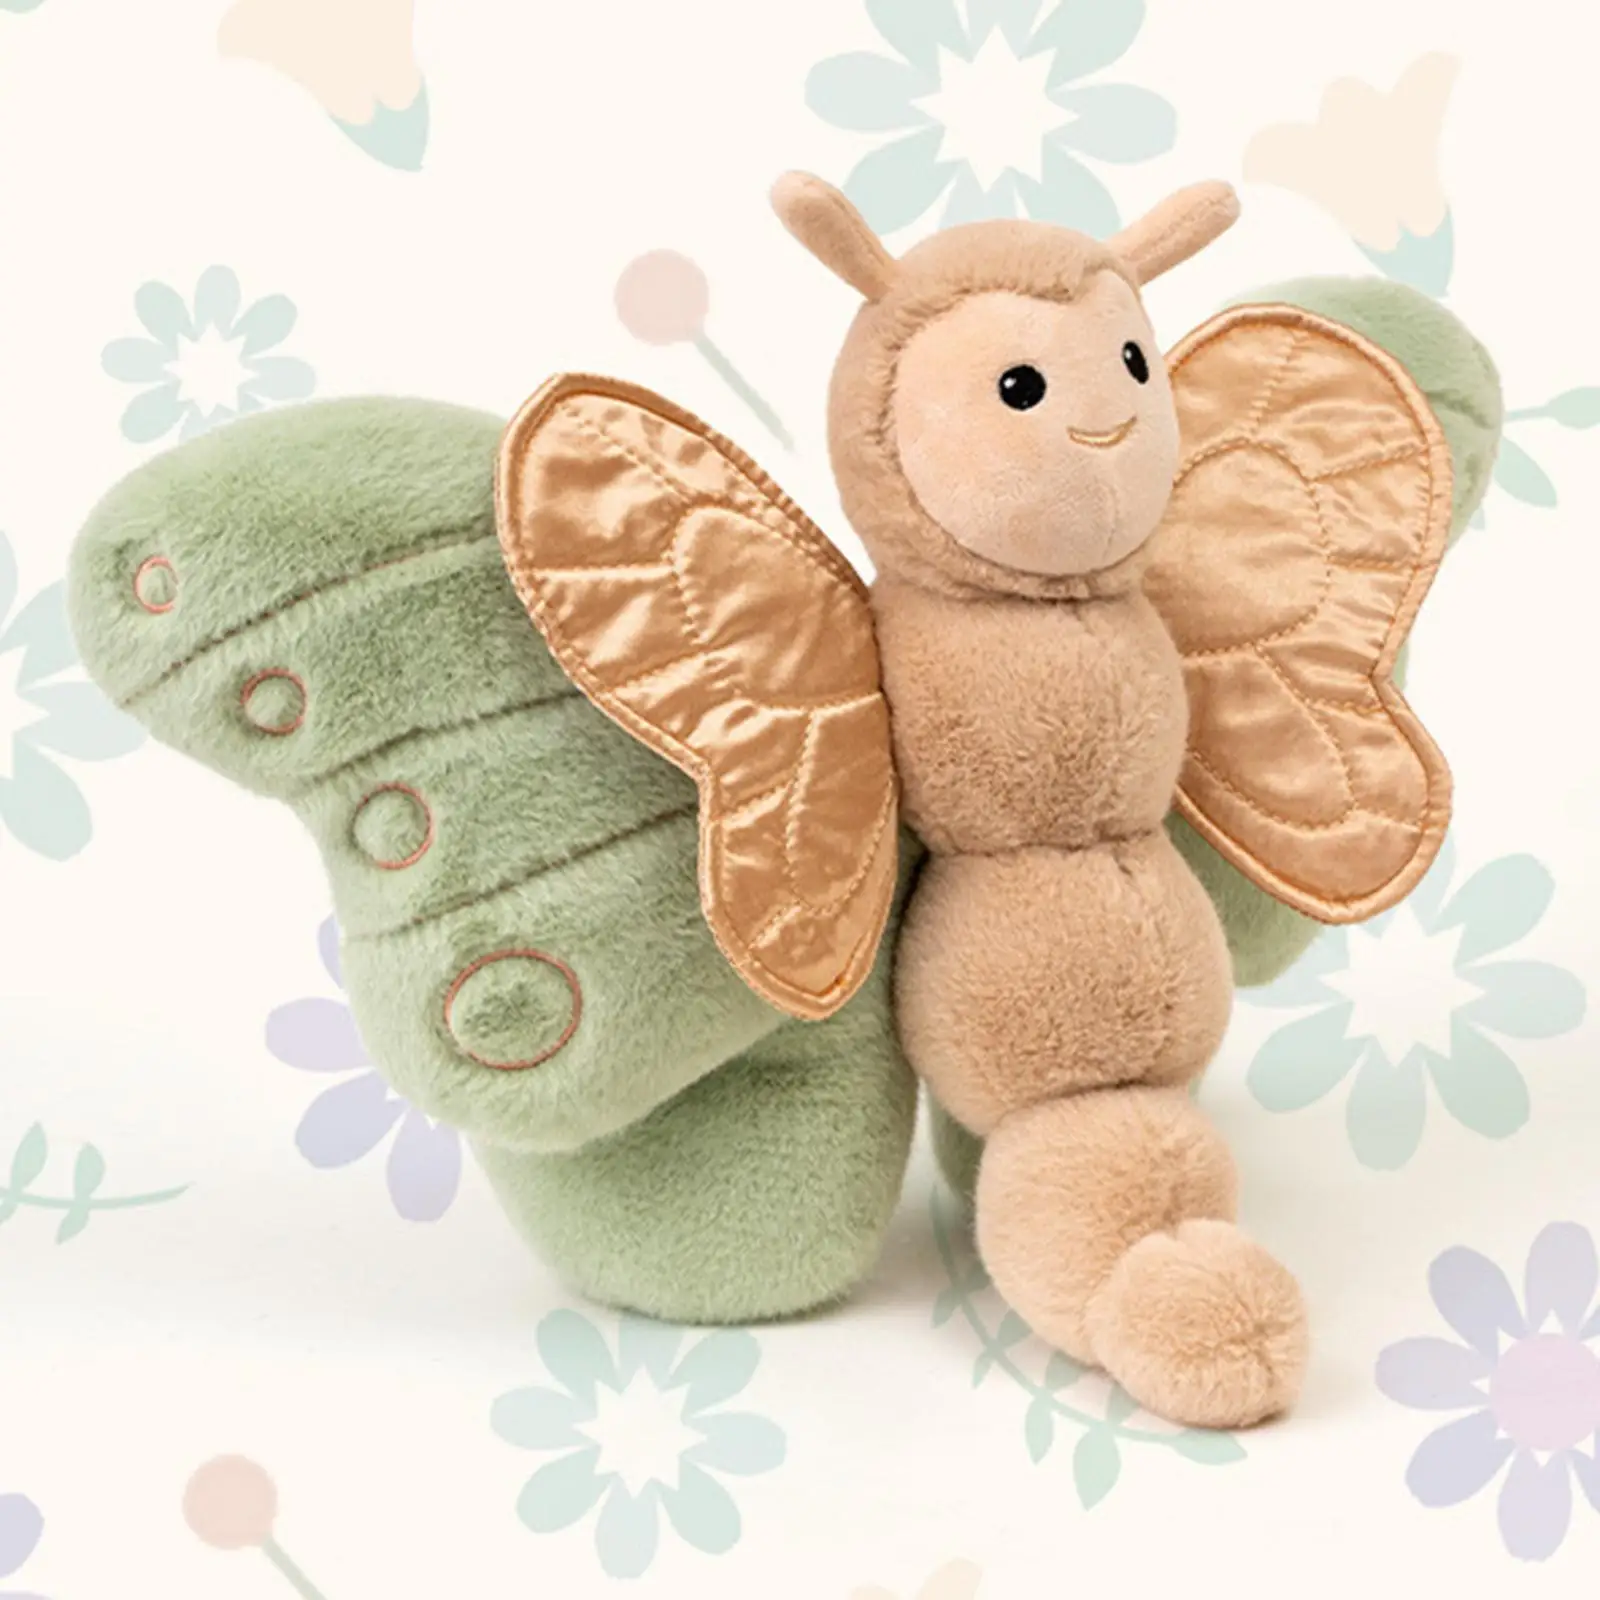 Cute Plush Butterfly Toy Cushion Decoration Girl Birthday Gift Ornament